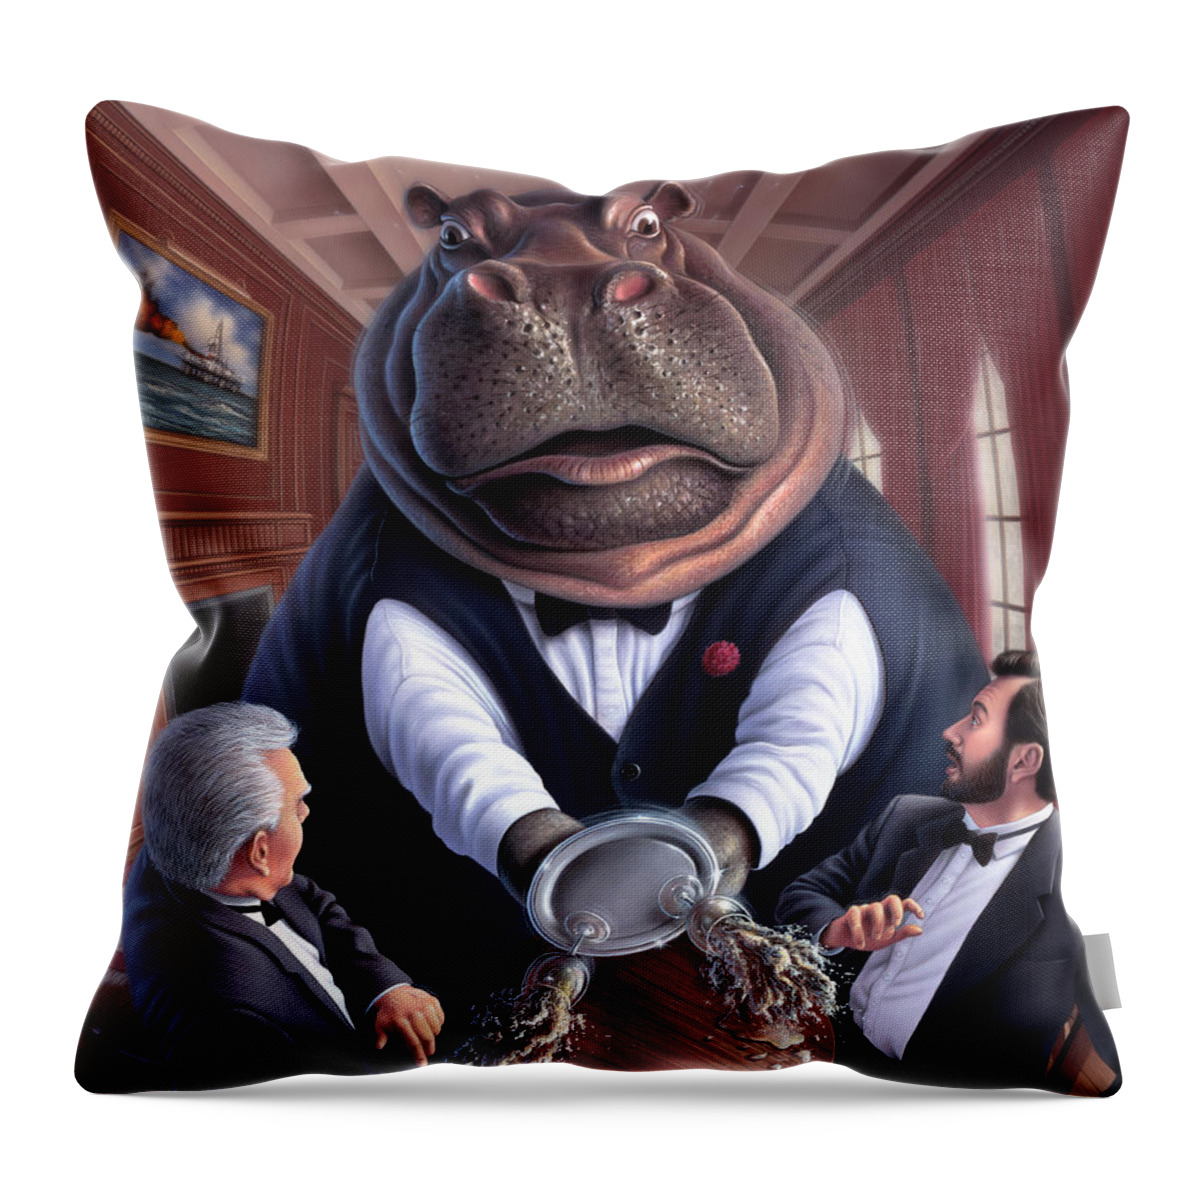 Hippo Throw Pillow featuring the painting Clumsy by Jerry LoFaro